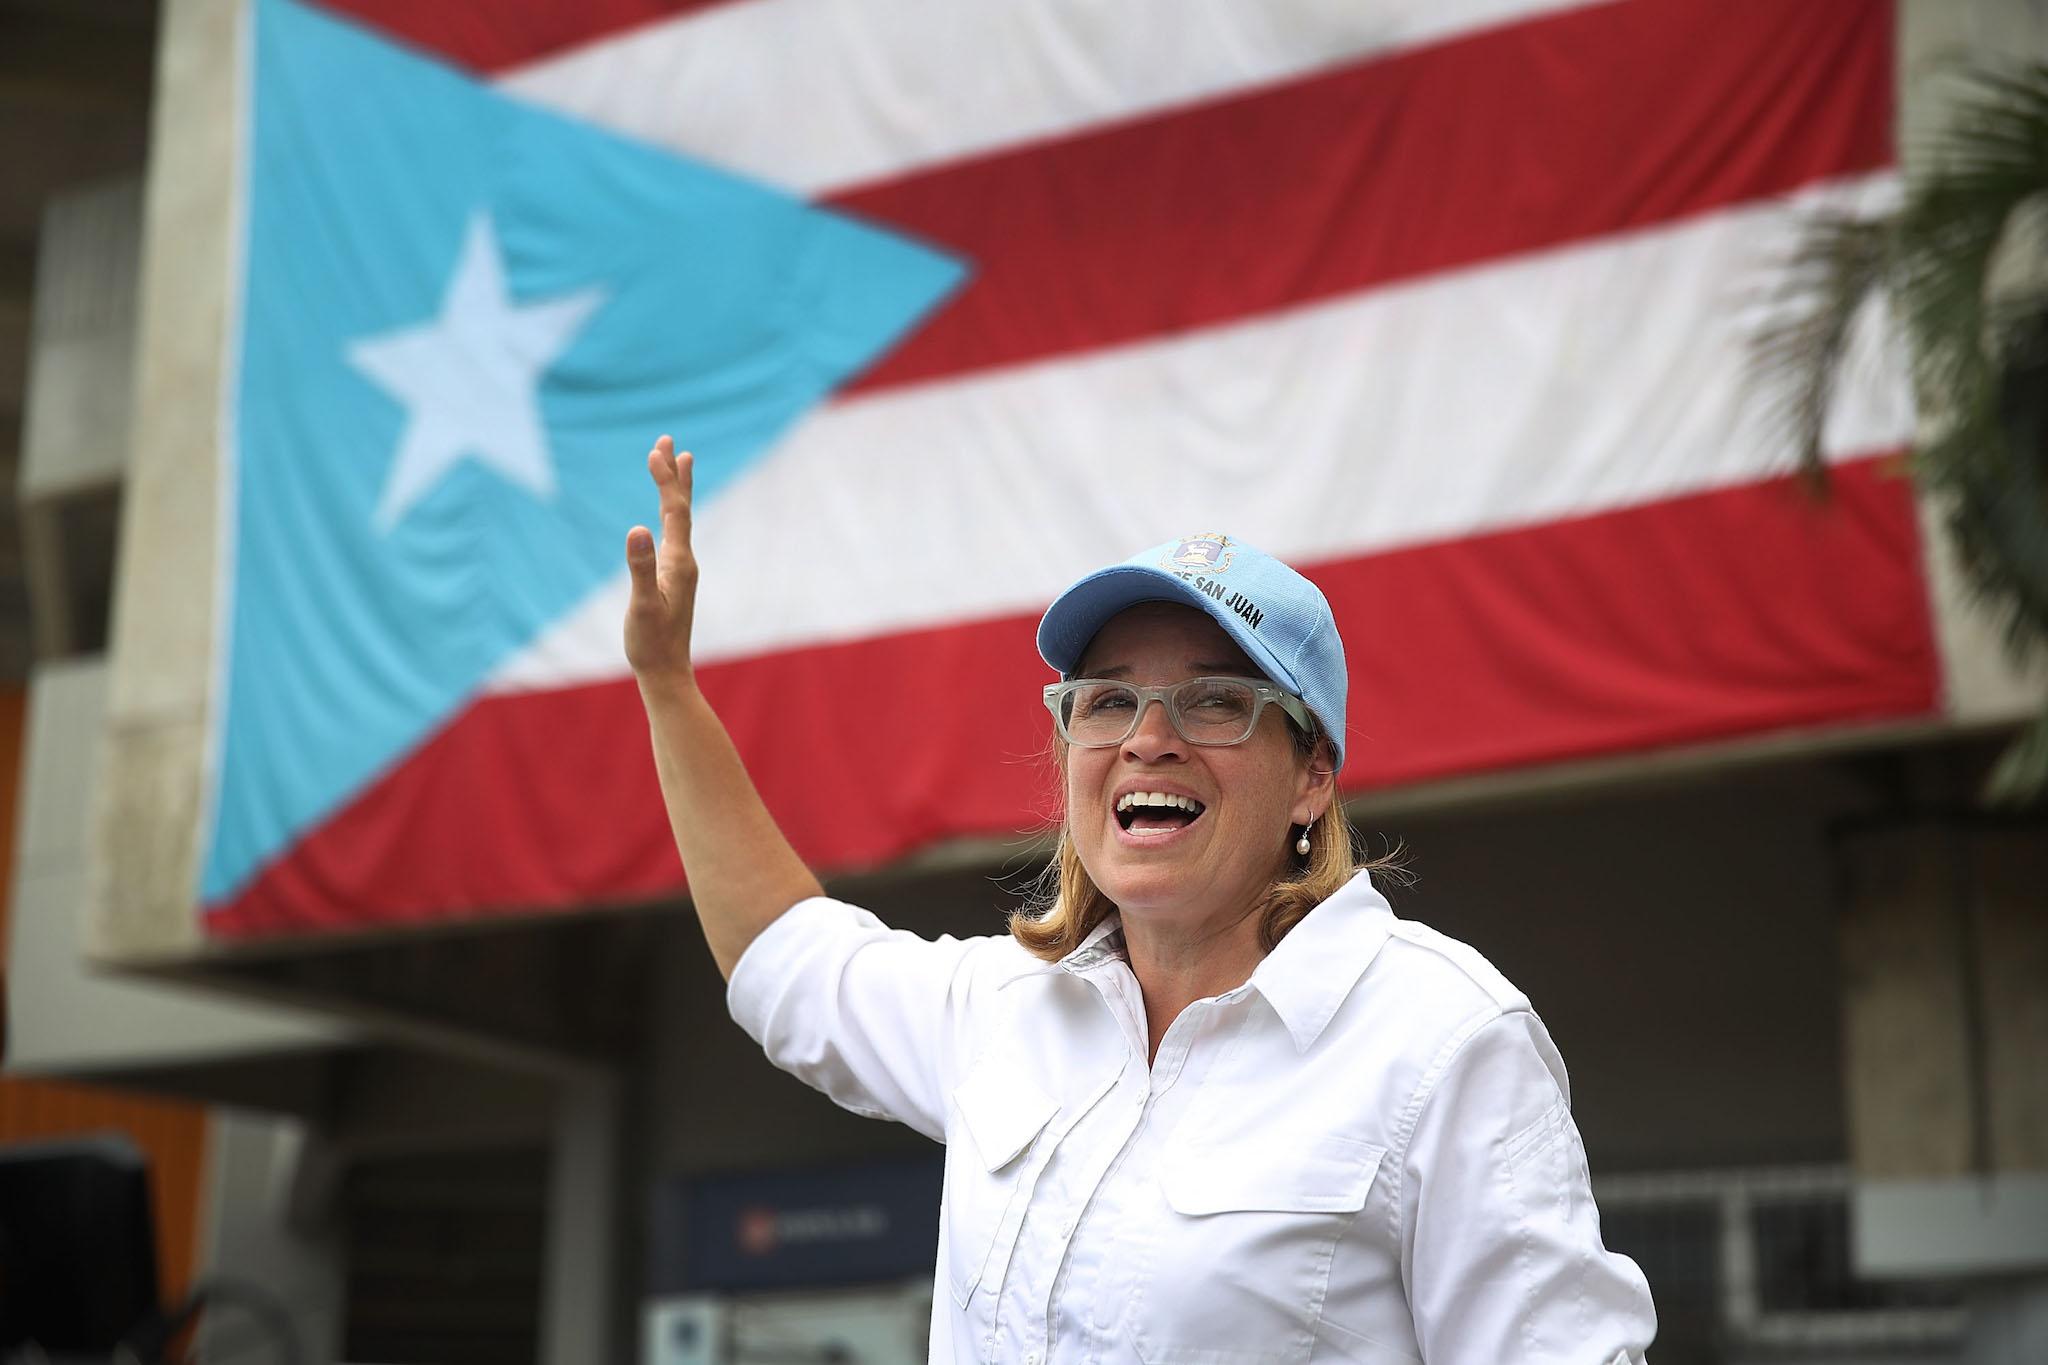 San Juan Mayor Carmen Yulin Cruz speaks to the media as she arrives at the temporary government center setup at the Roberto Clemente stadium in the aftermath of Hurricane Maria